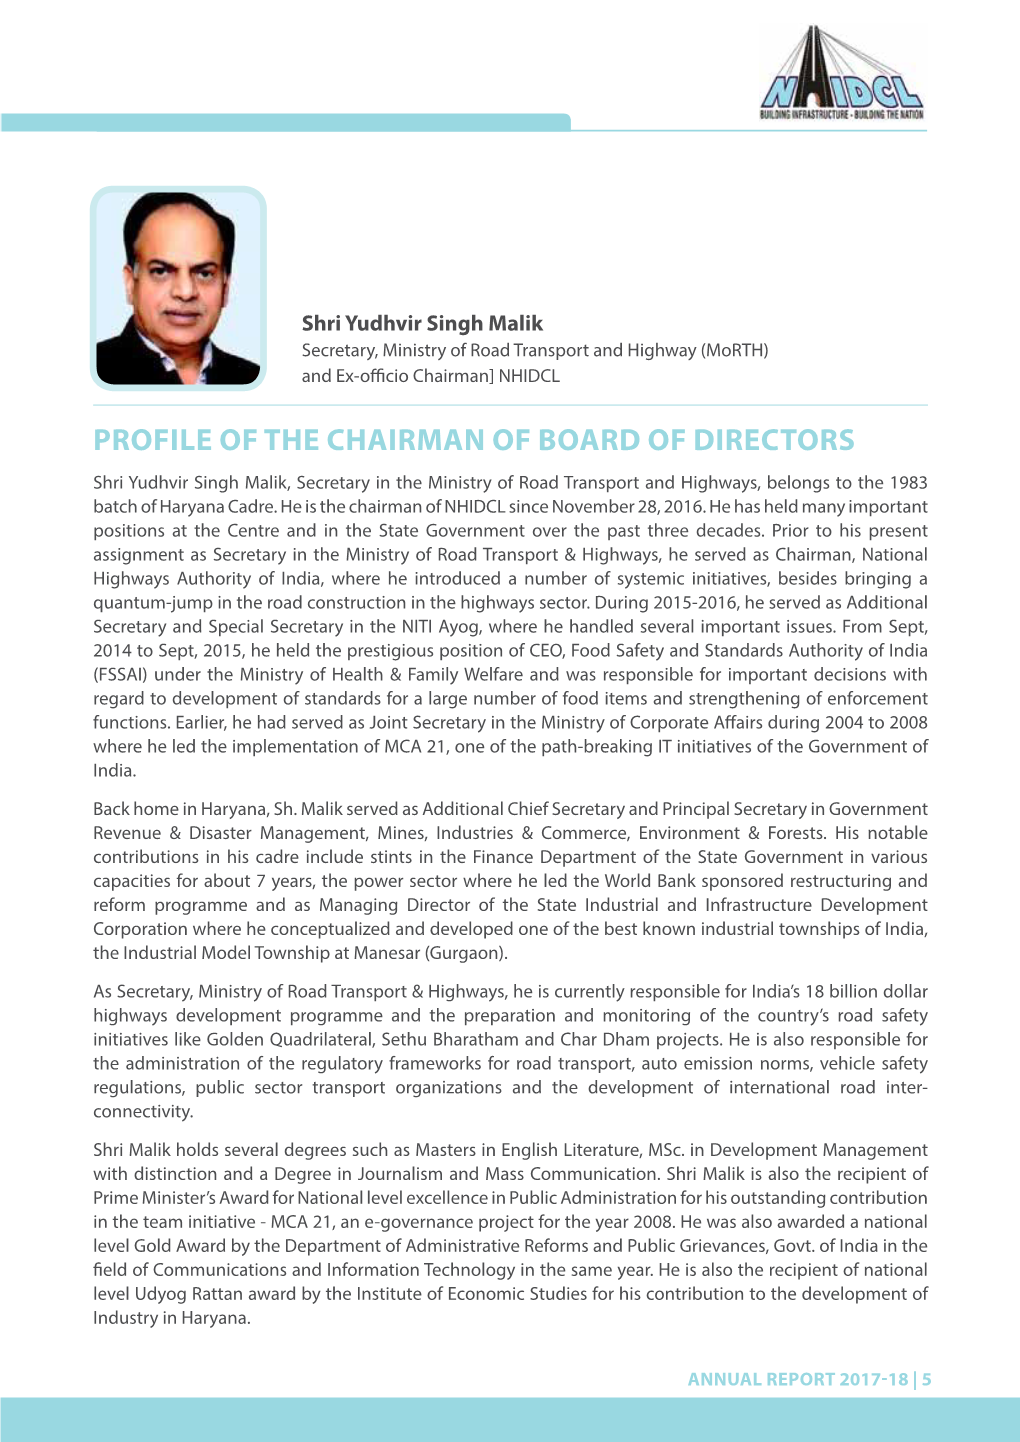 Profile of the Chairman of Board of Directors